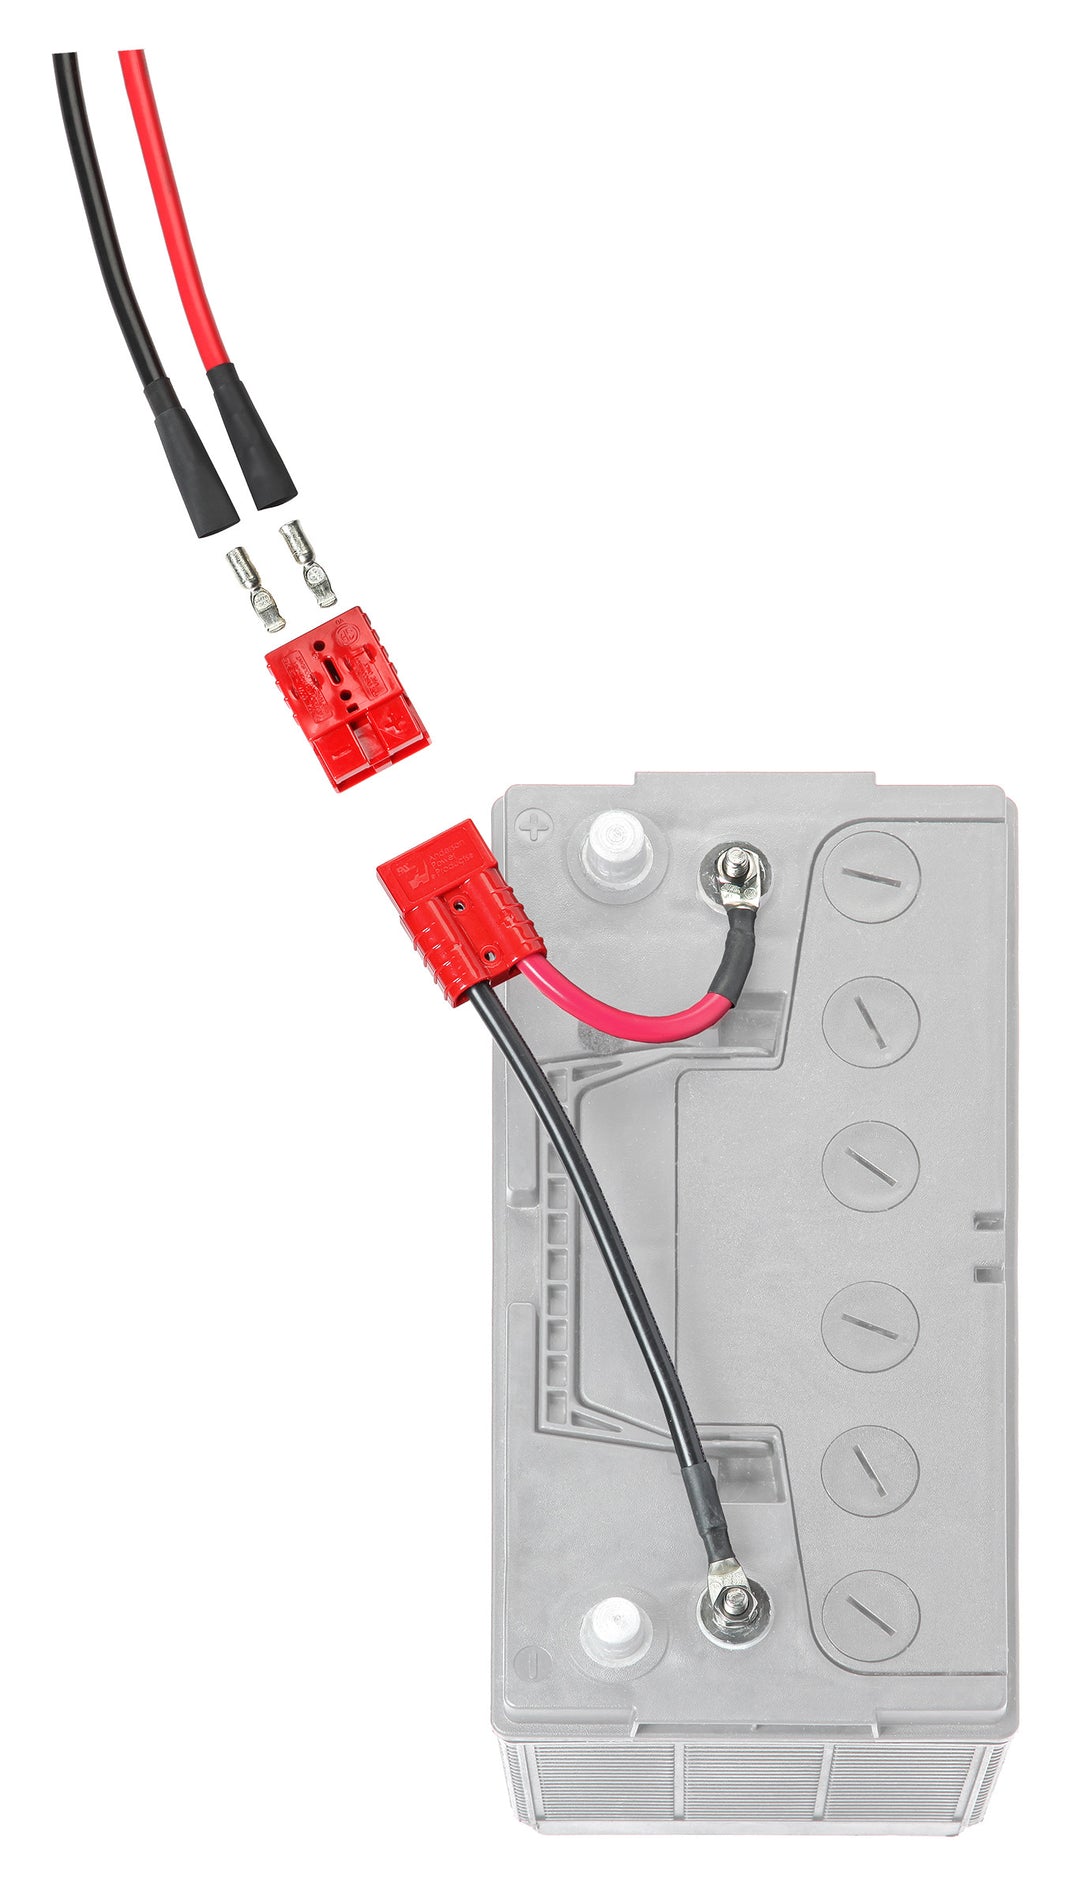 Outboard Motor Connection Kit (CE12BOMK) - Connect-Ease. Connect all your marine equipment with ease.